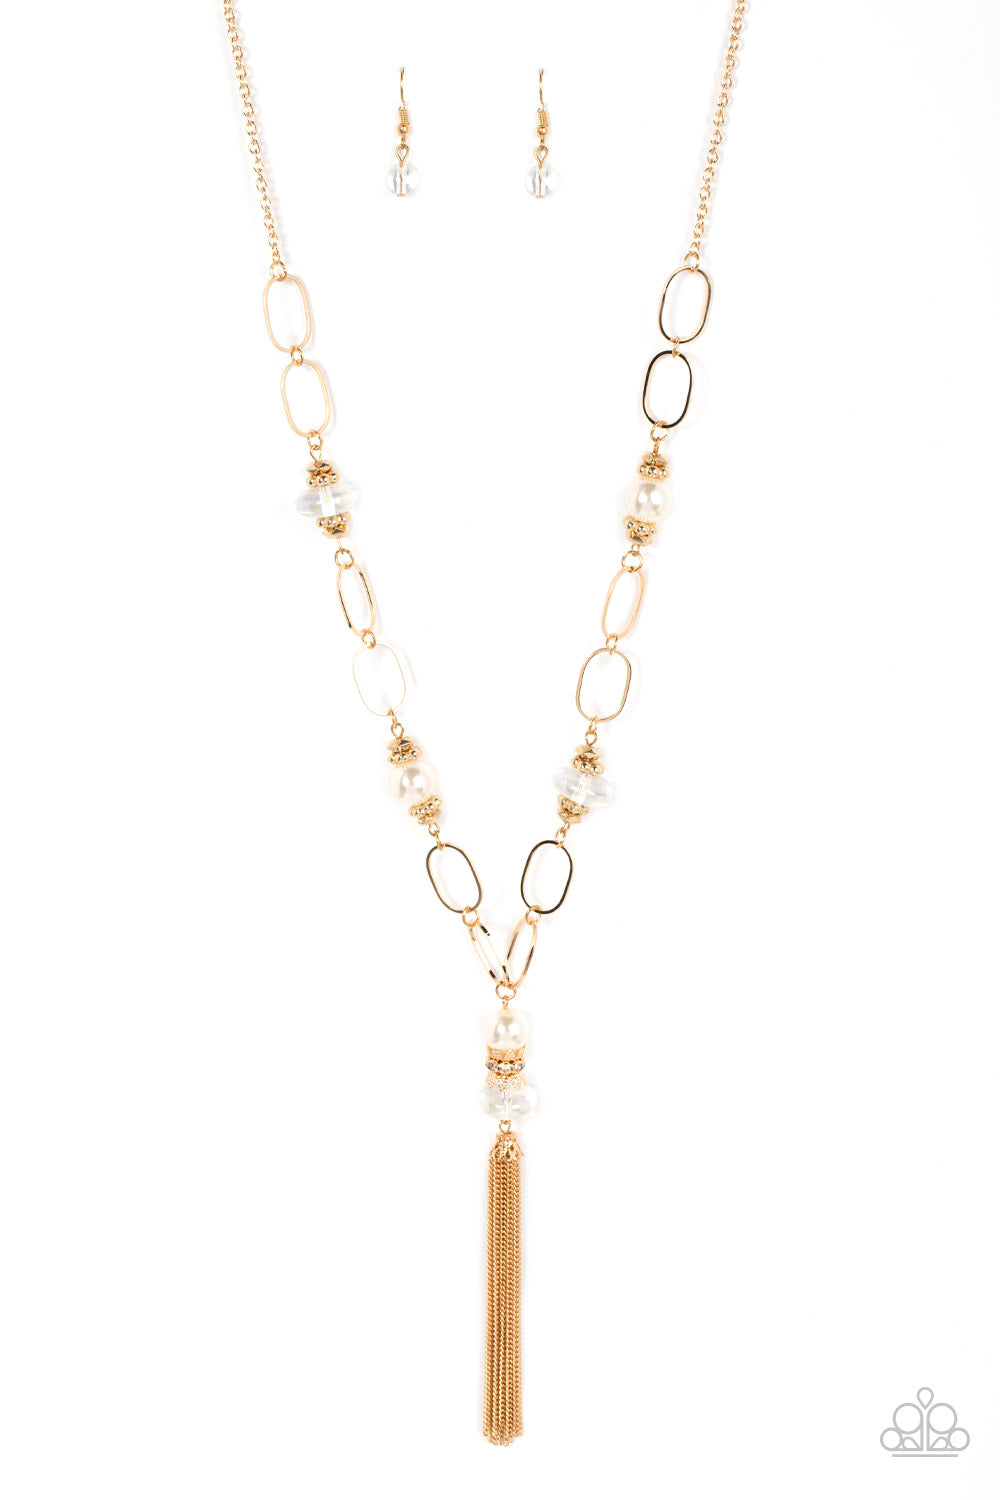 Taken with Tassels - Gold and Pearl Necklace - Paparazzi Accessories - Infused with faceted and studded gold accents, iridescent beads and oversized white pearls connect with sections of oversized gold hoops across the chest. Enhanced with matching beaded accents, a shimmery gold tassel swings from the bottom for a romantic finish. Features an adjustable clasp closure.